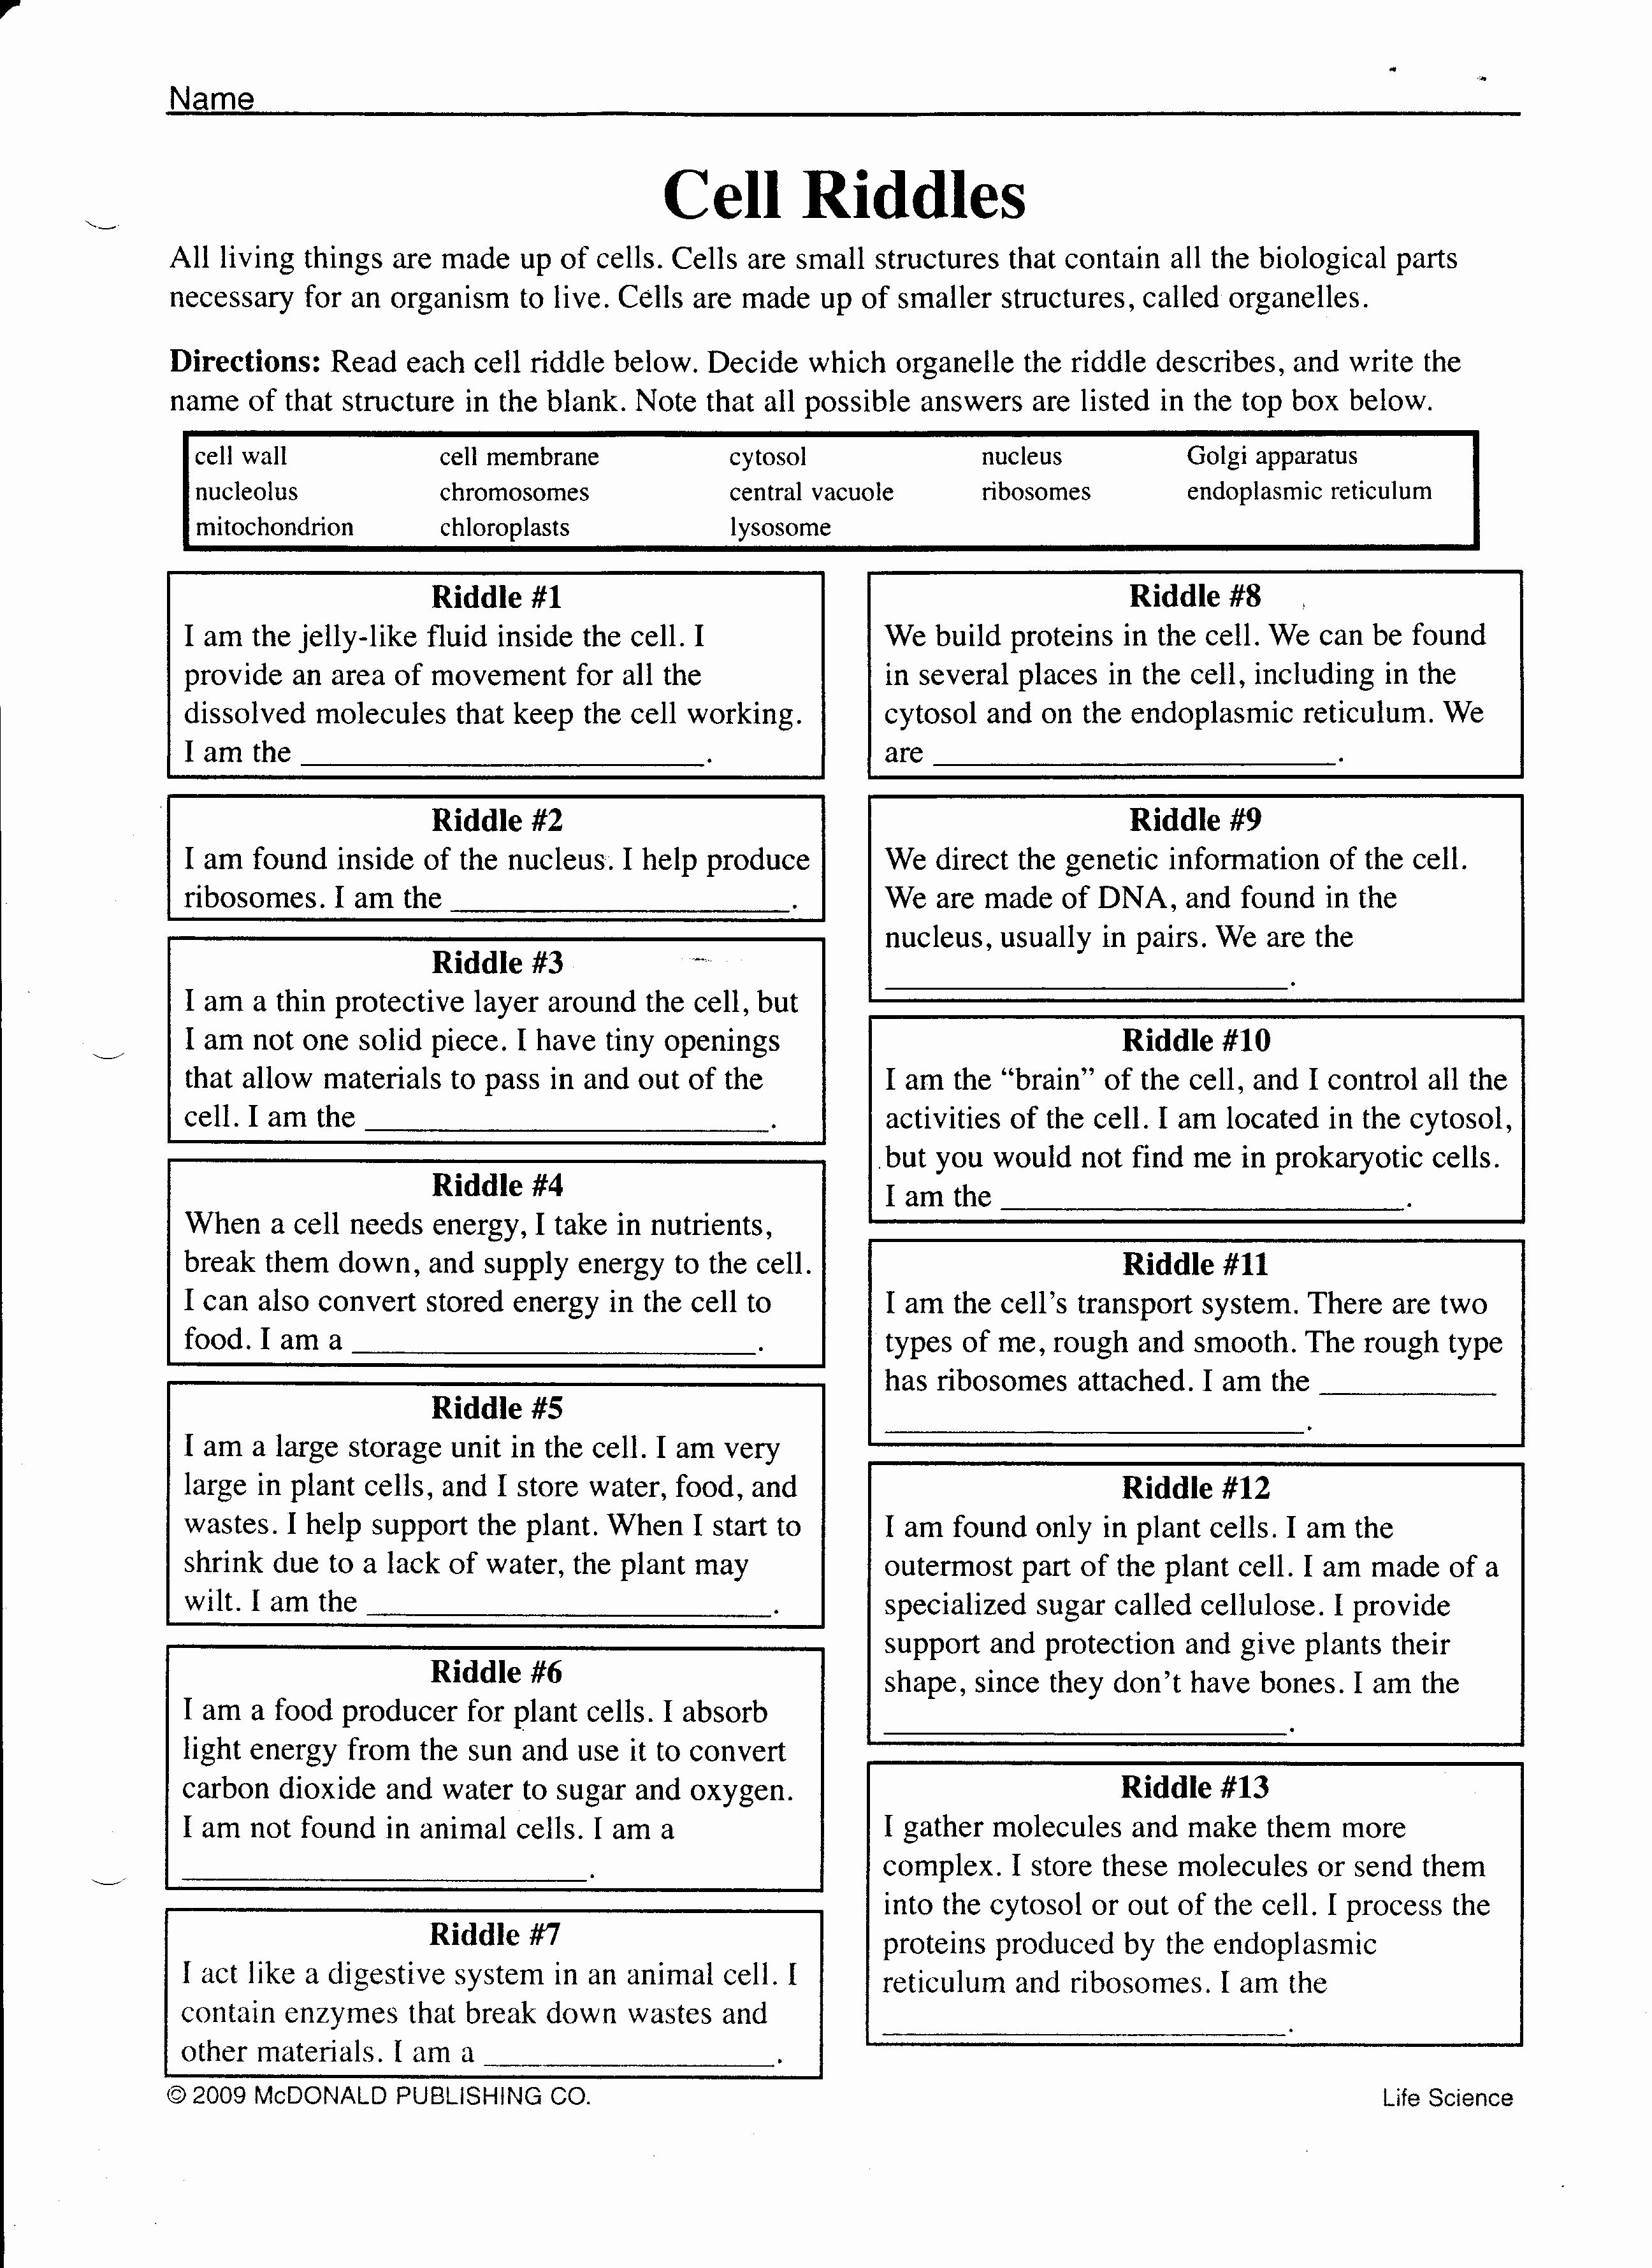 Cell organelles Worksheet Answer Key Beautiful 14 Best Of Cell organelle Riddles Worksheet Answers